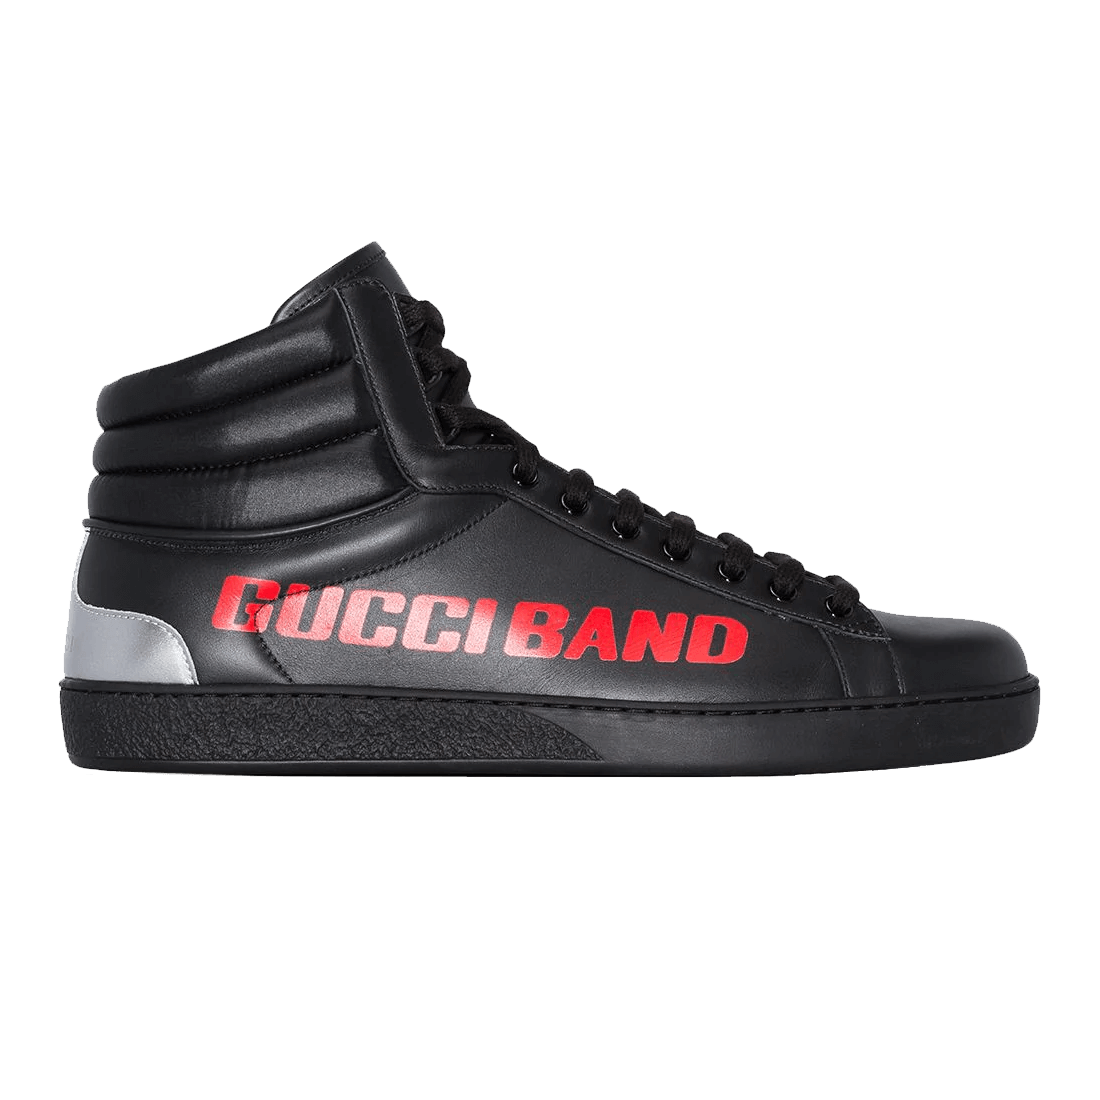 Ace Gucci Band High-top Sneakers 